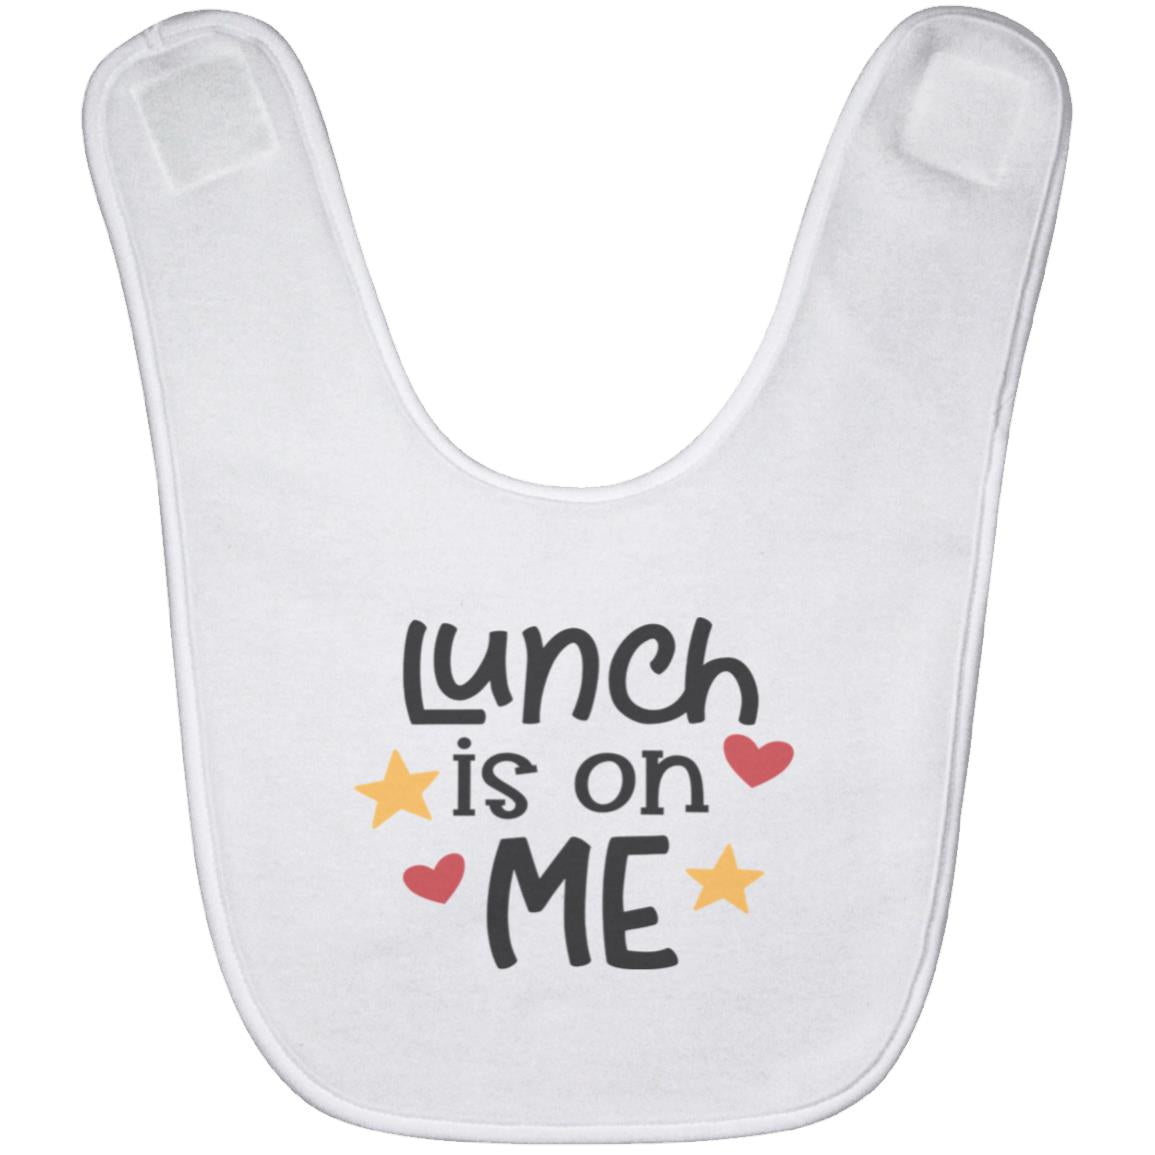 Lunch is on Me Baby Bib